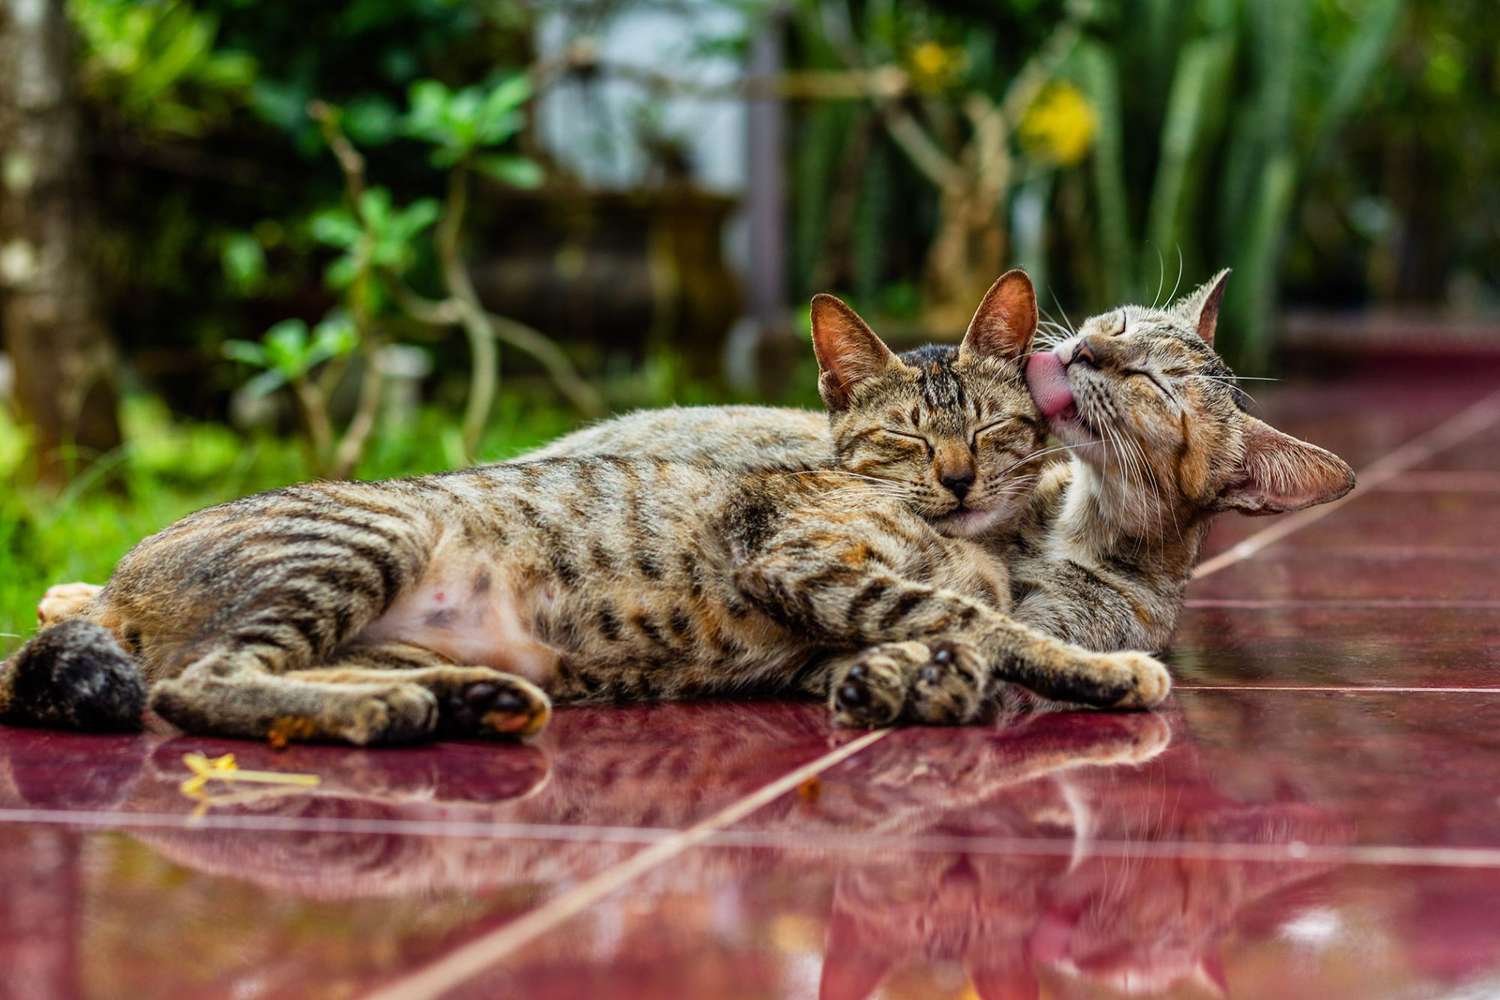 two European Shorthair cats snuggling with one grooming the other